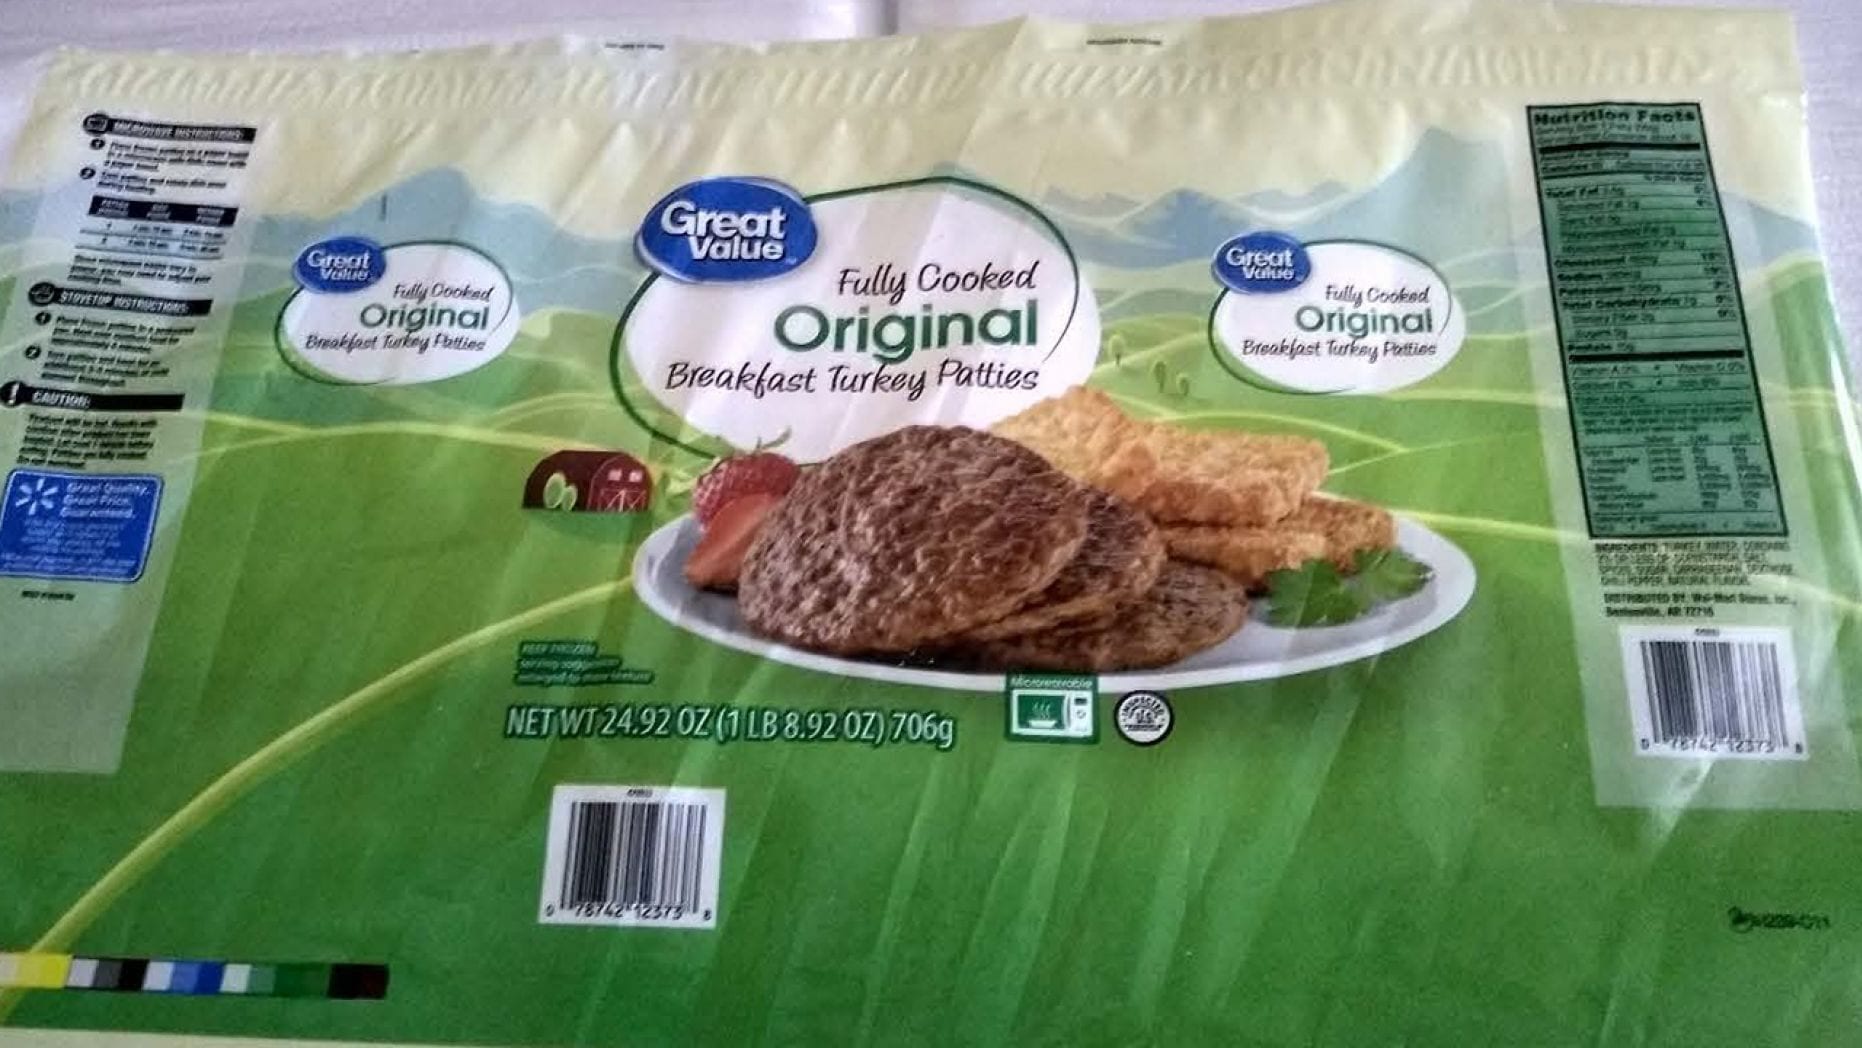 Recalled 'Great Value' meat product